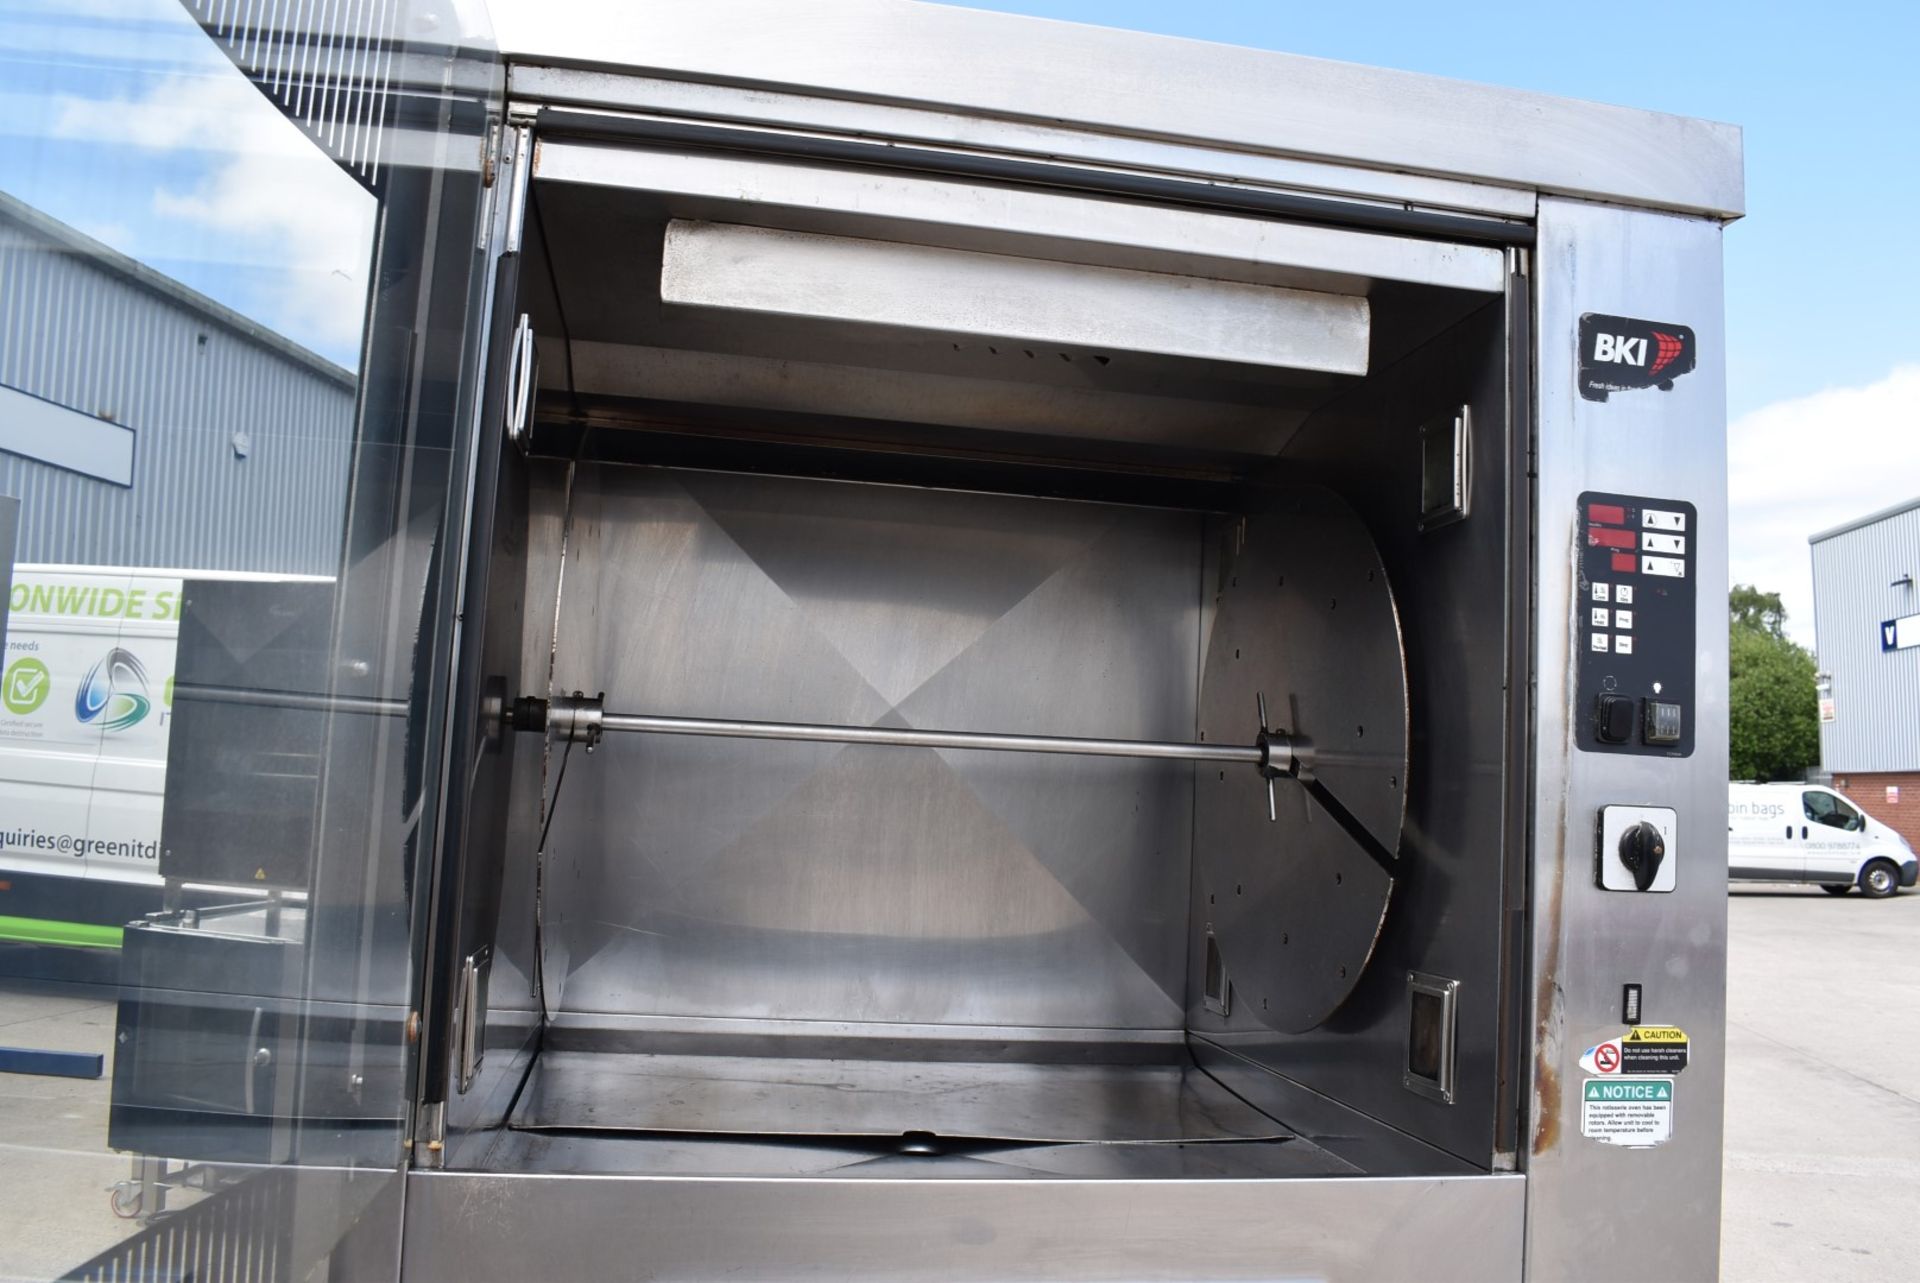 1 x BKI BBQ King Commercial Rotisserie Chicken Oven With Stand - Cooks Upto 40 Chickens - 3 Phase - Image 3 of 8